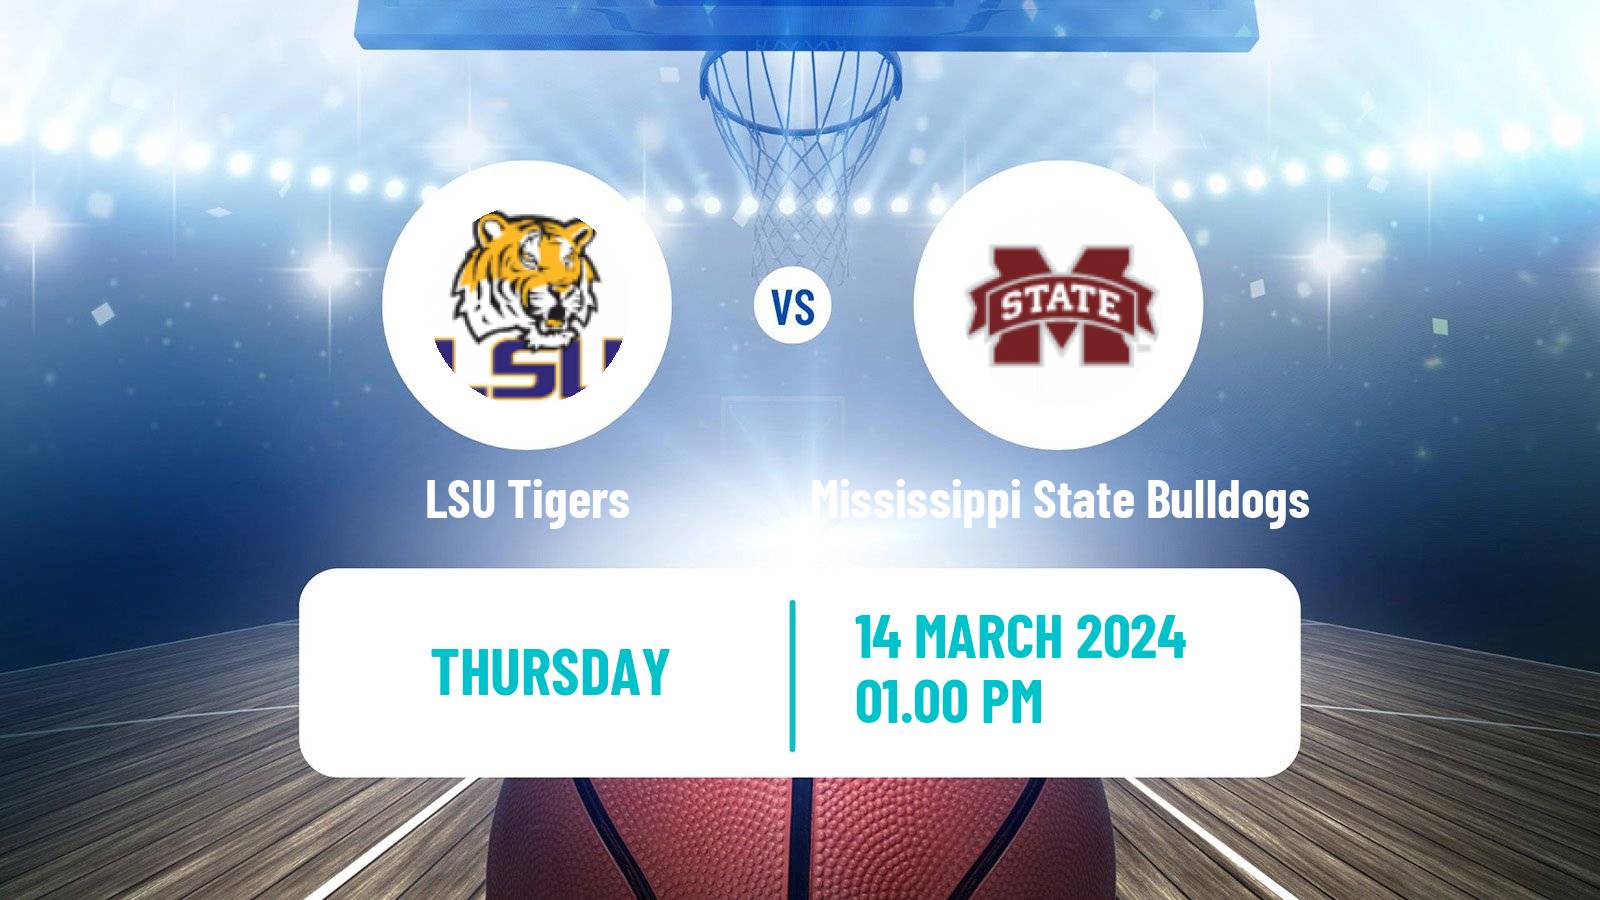 Basketball NCAA College Basketball LSU Tigers - Mississippi State Bulldogs